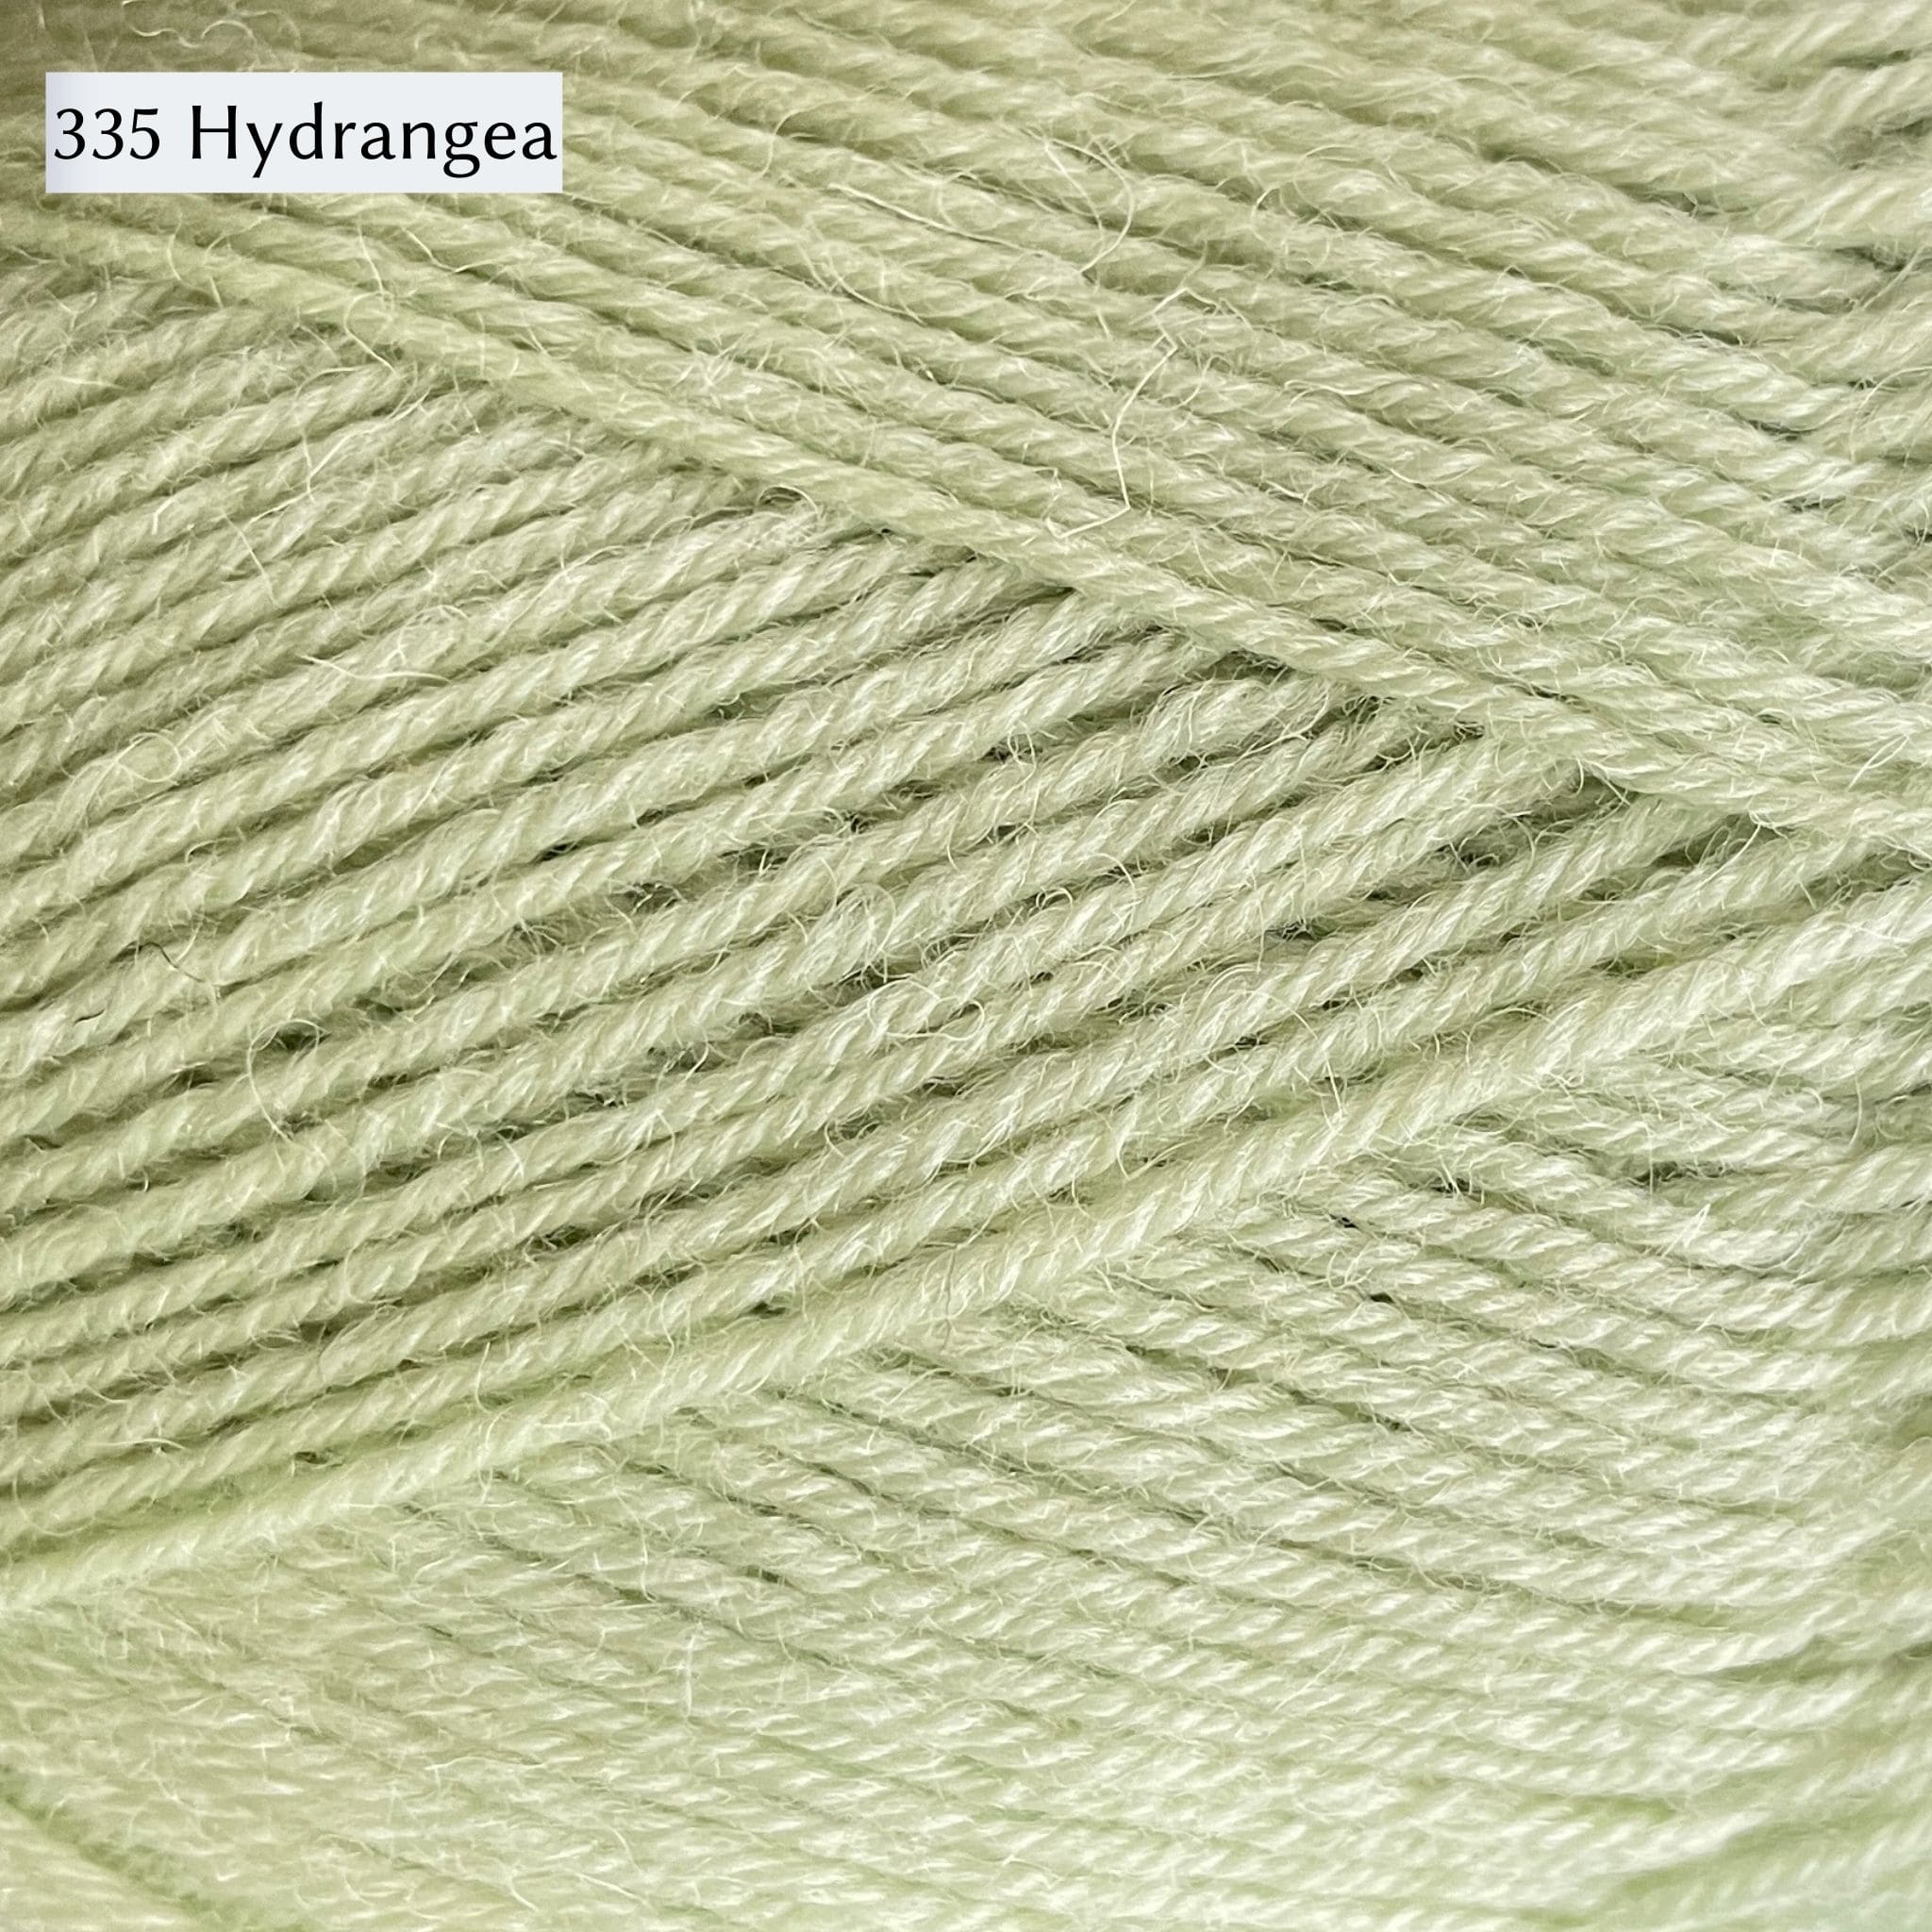 West Yorkshire Spinners Signature 4ply yarn, 100-gram ball, fingering weight, in color 335 Hydrangea, a very light warm green